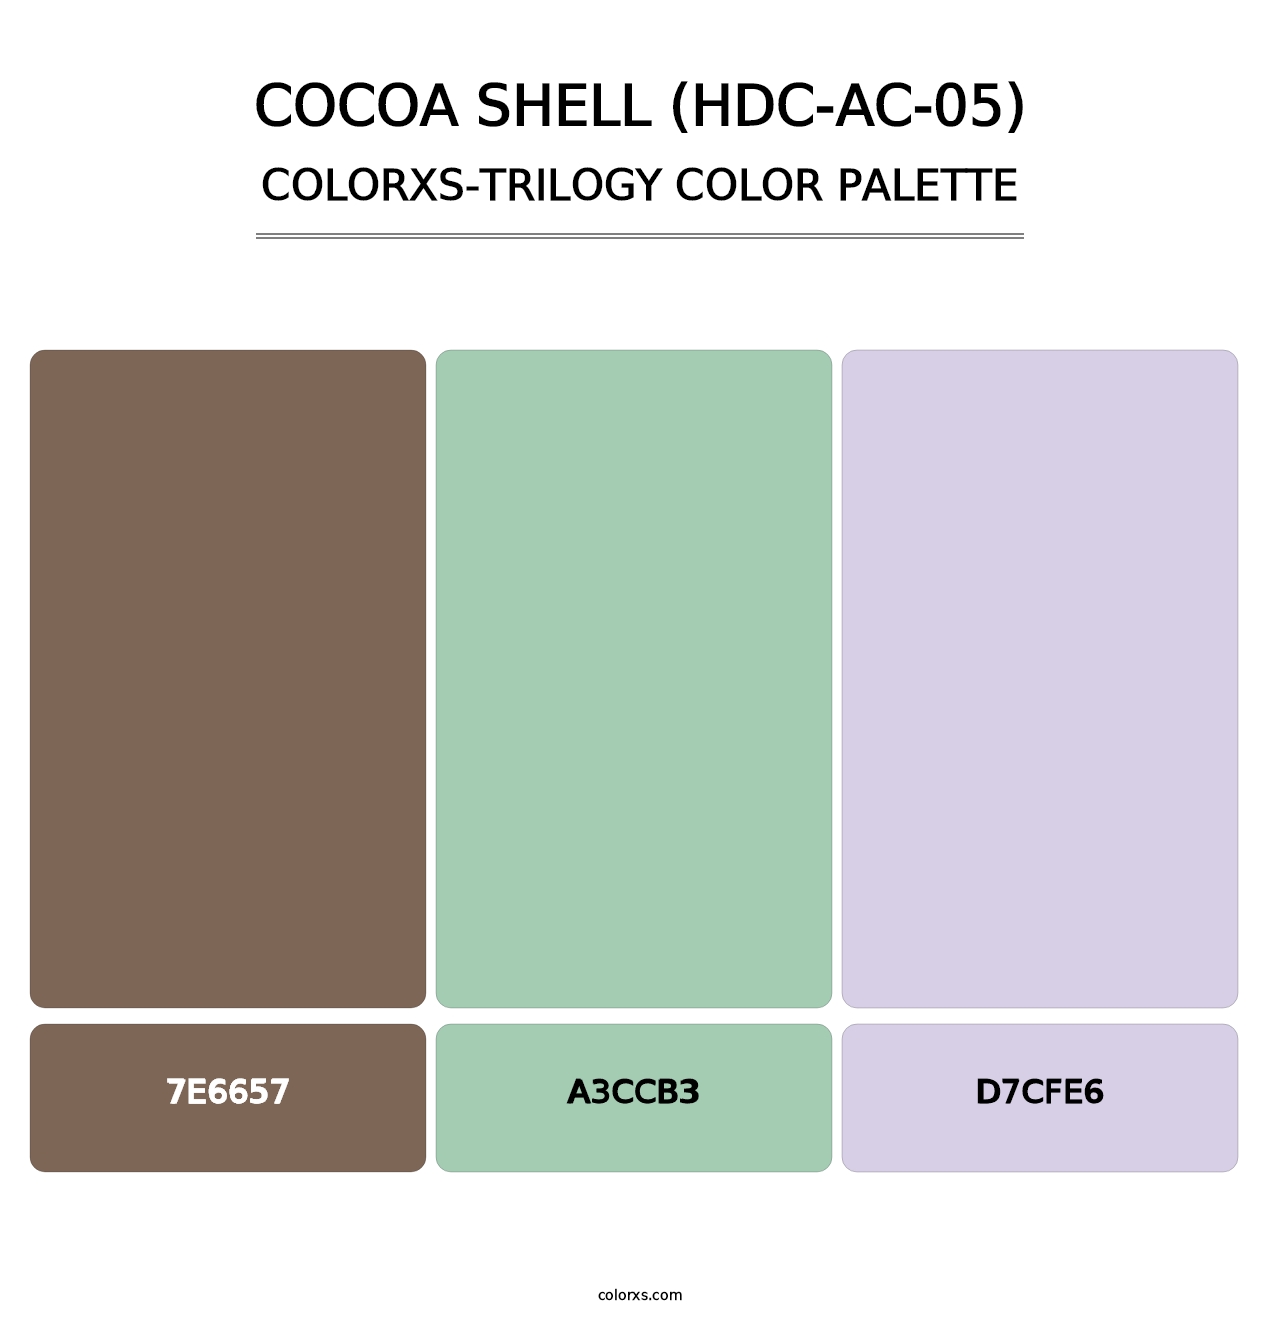 Cocoa Shell (HDC-AC-05) - Colorxs Trilogy Palette